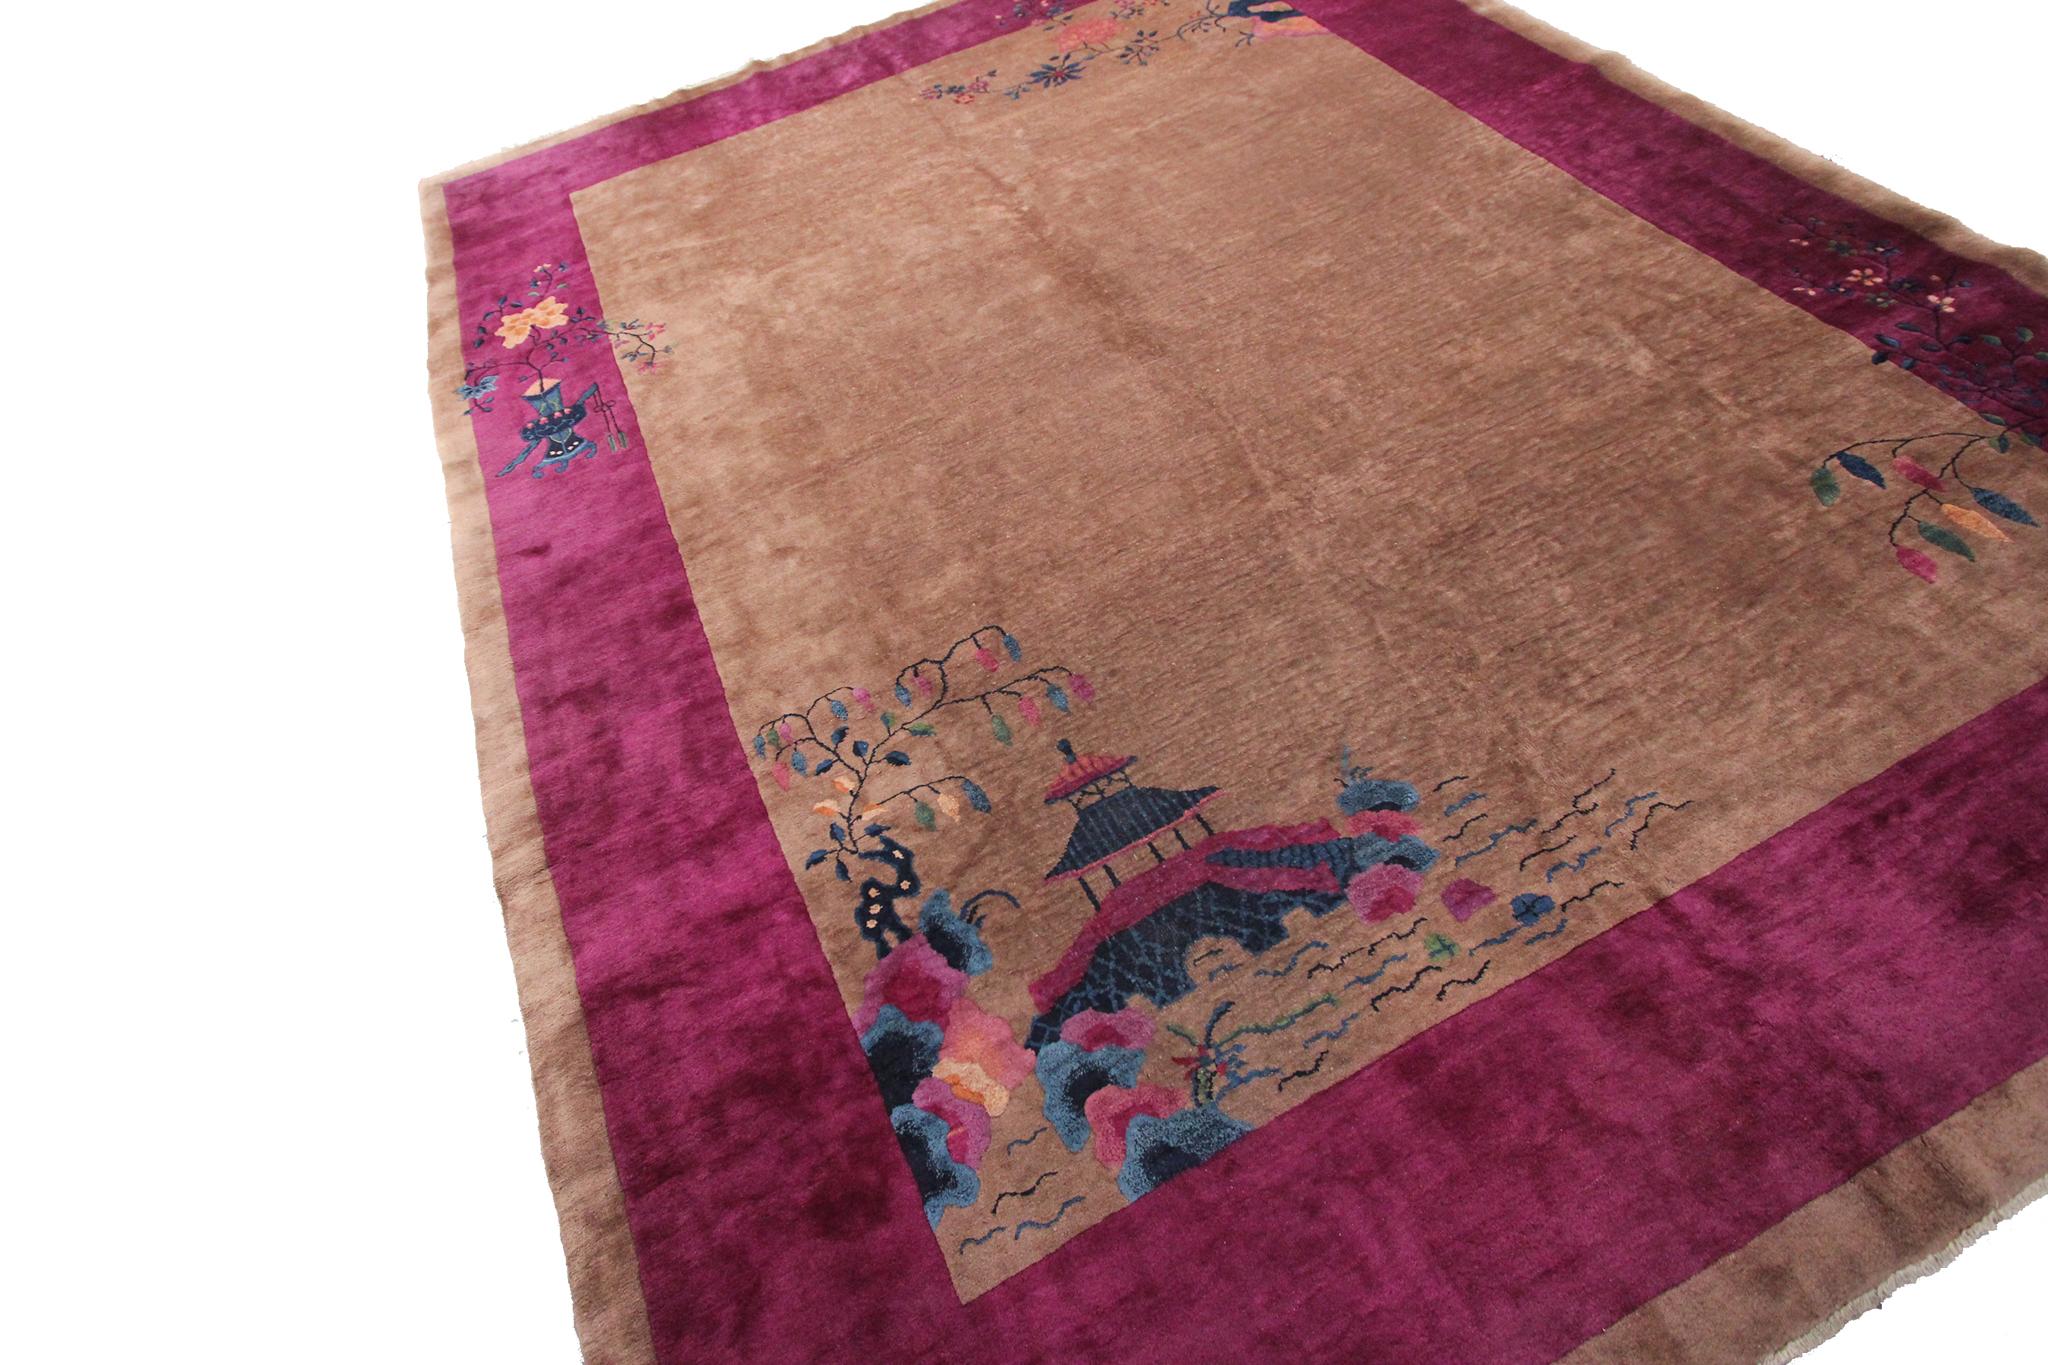 Early 20th Century Antique Art Deco Rug Antique Chinese Walter Nichols Rug 1920 9x12 277cm x 348cm For Sale